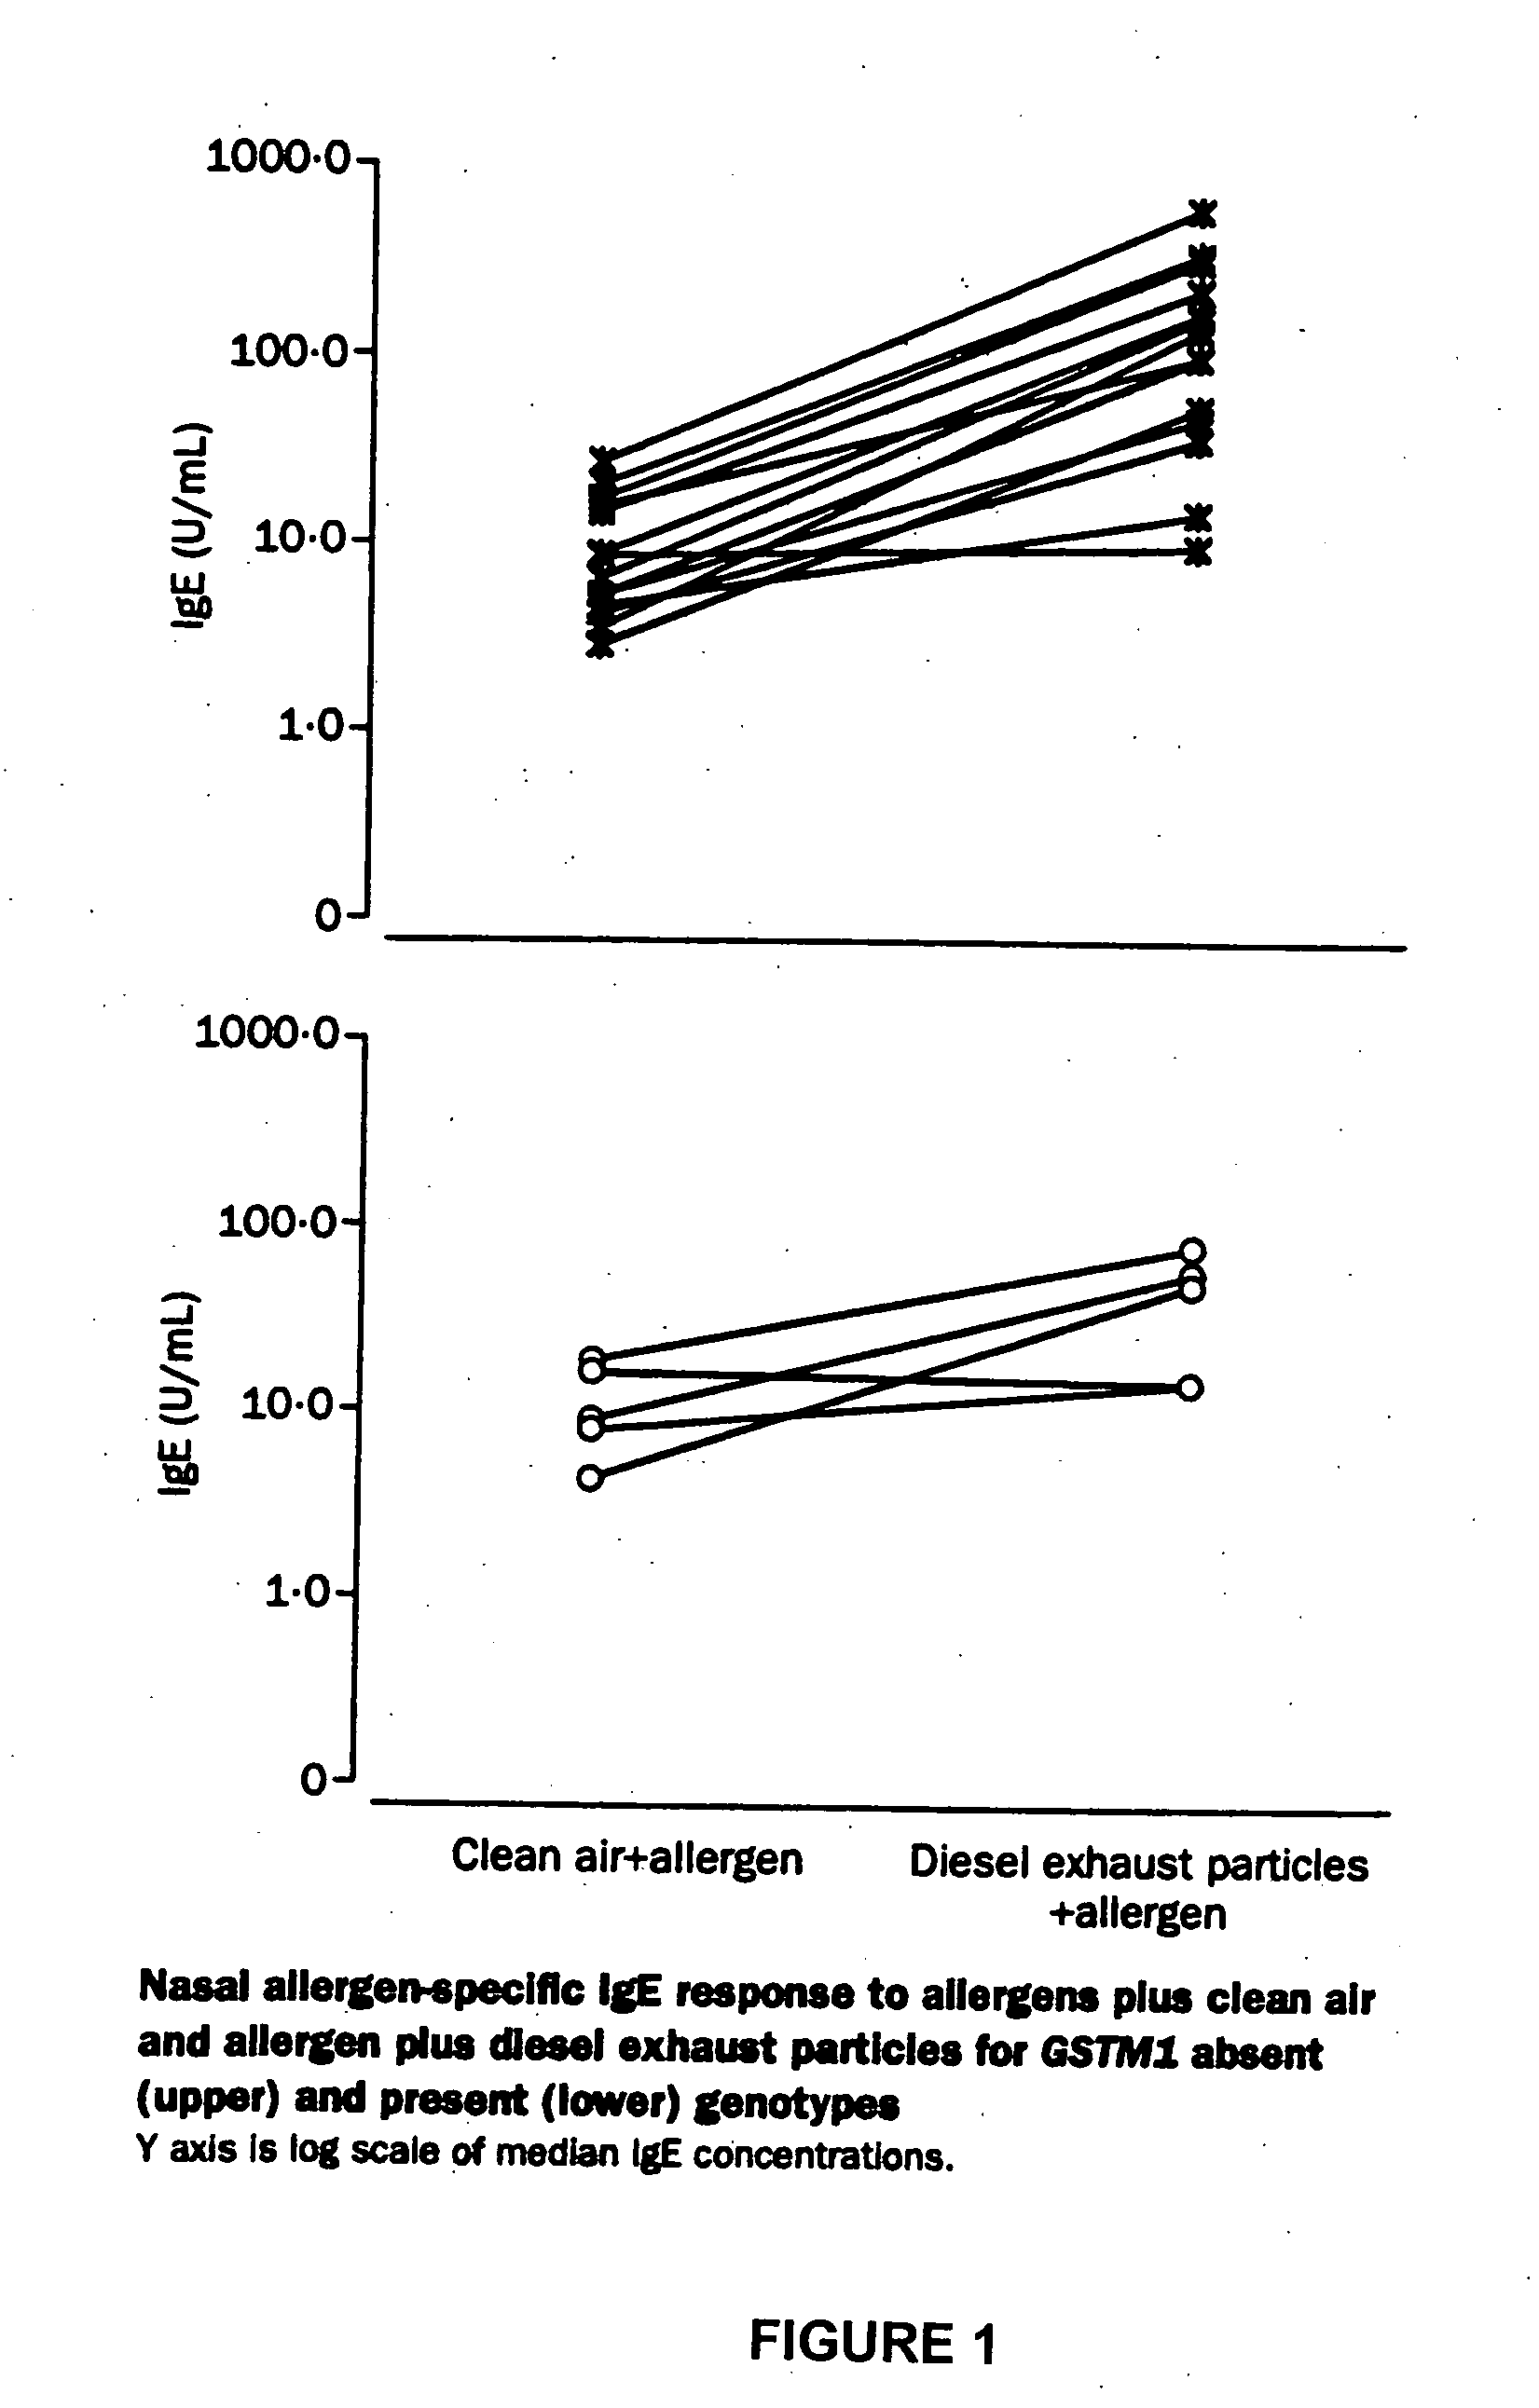 Method for determining susceptibility of an individual to allergen induced hypersensitivity